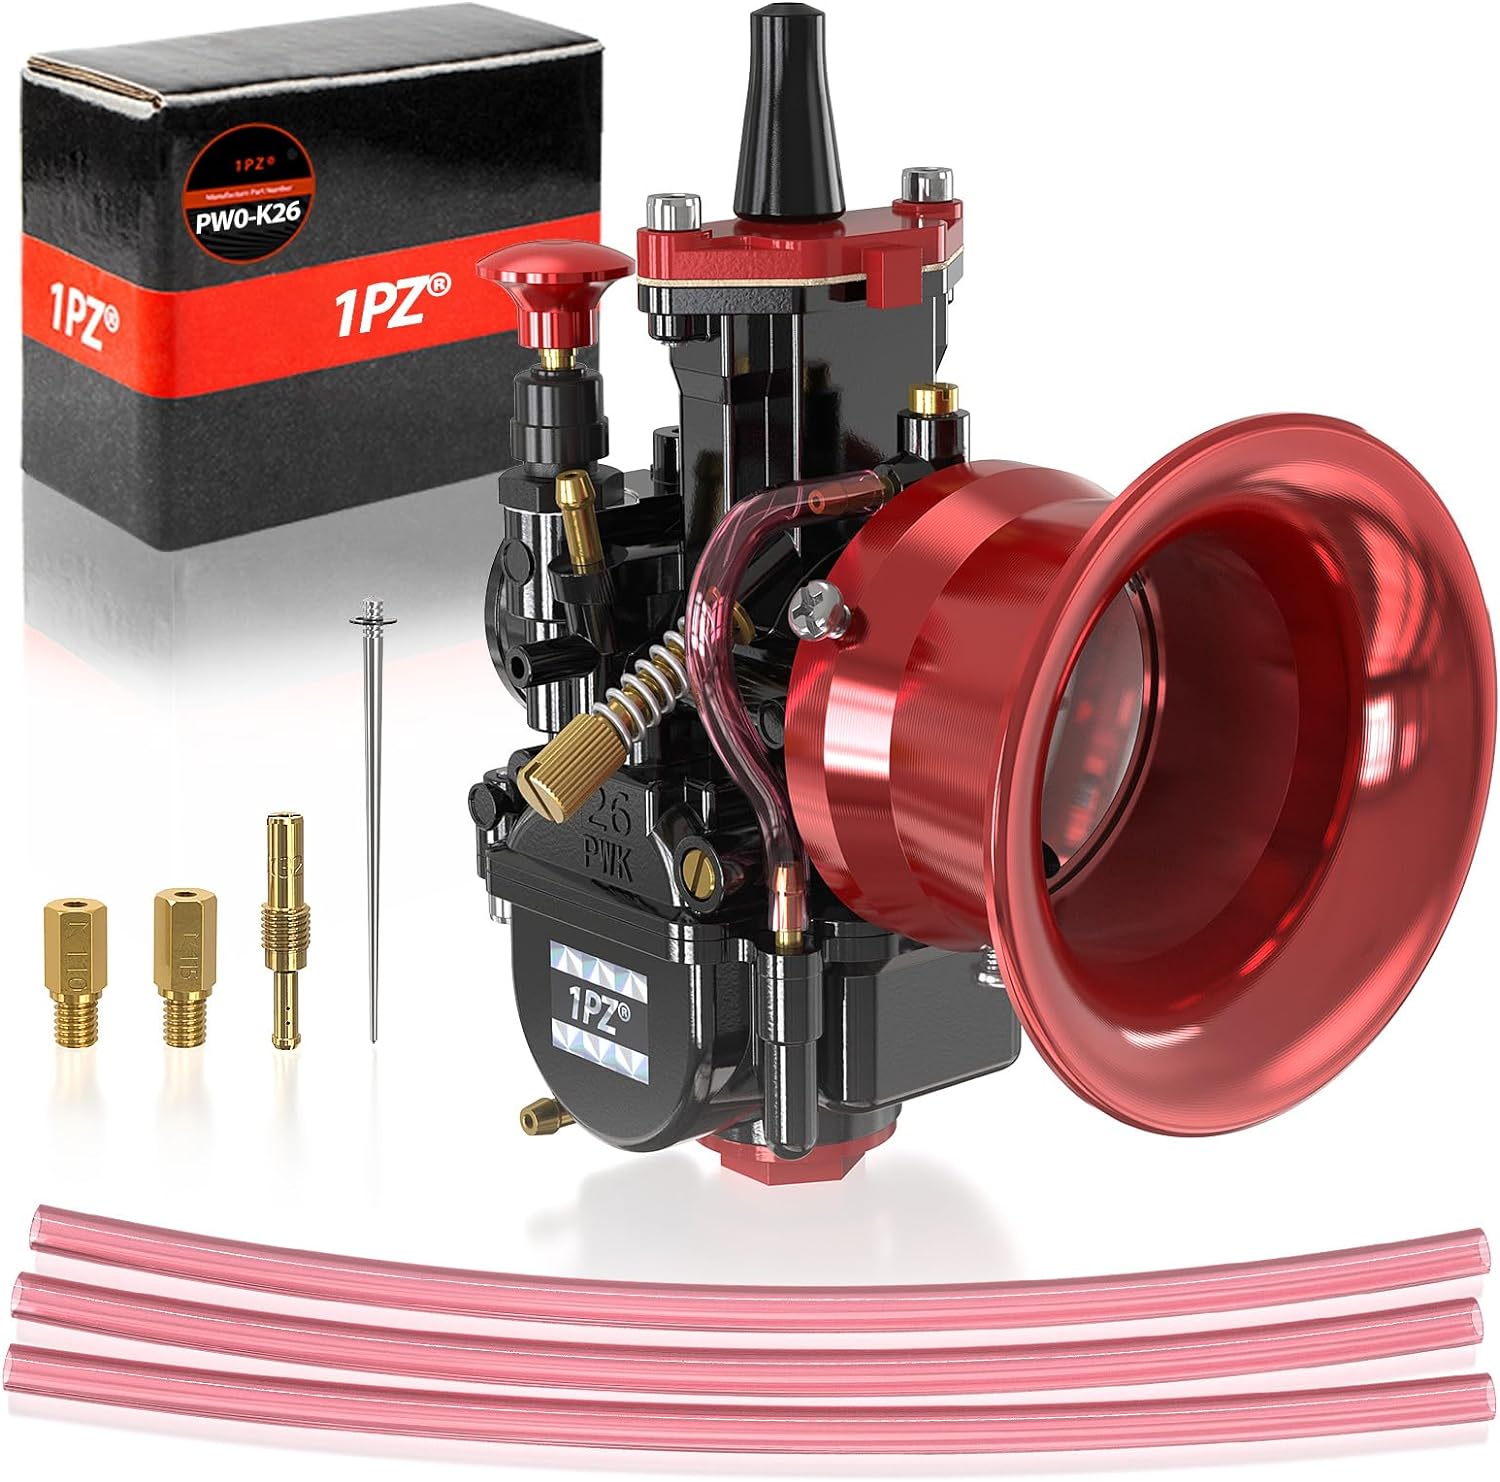 1PZ PWK 26MM Carburetor Carb With Air Filter Interface Wind Cup Replacement for 70cc to 140cc 2T 4T Engine GY6 Engine Dirt Bike Mini Bike SSR TTR Apollo TaoTao ATV